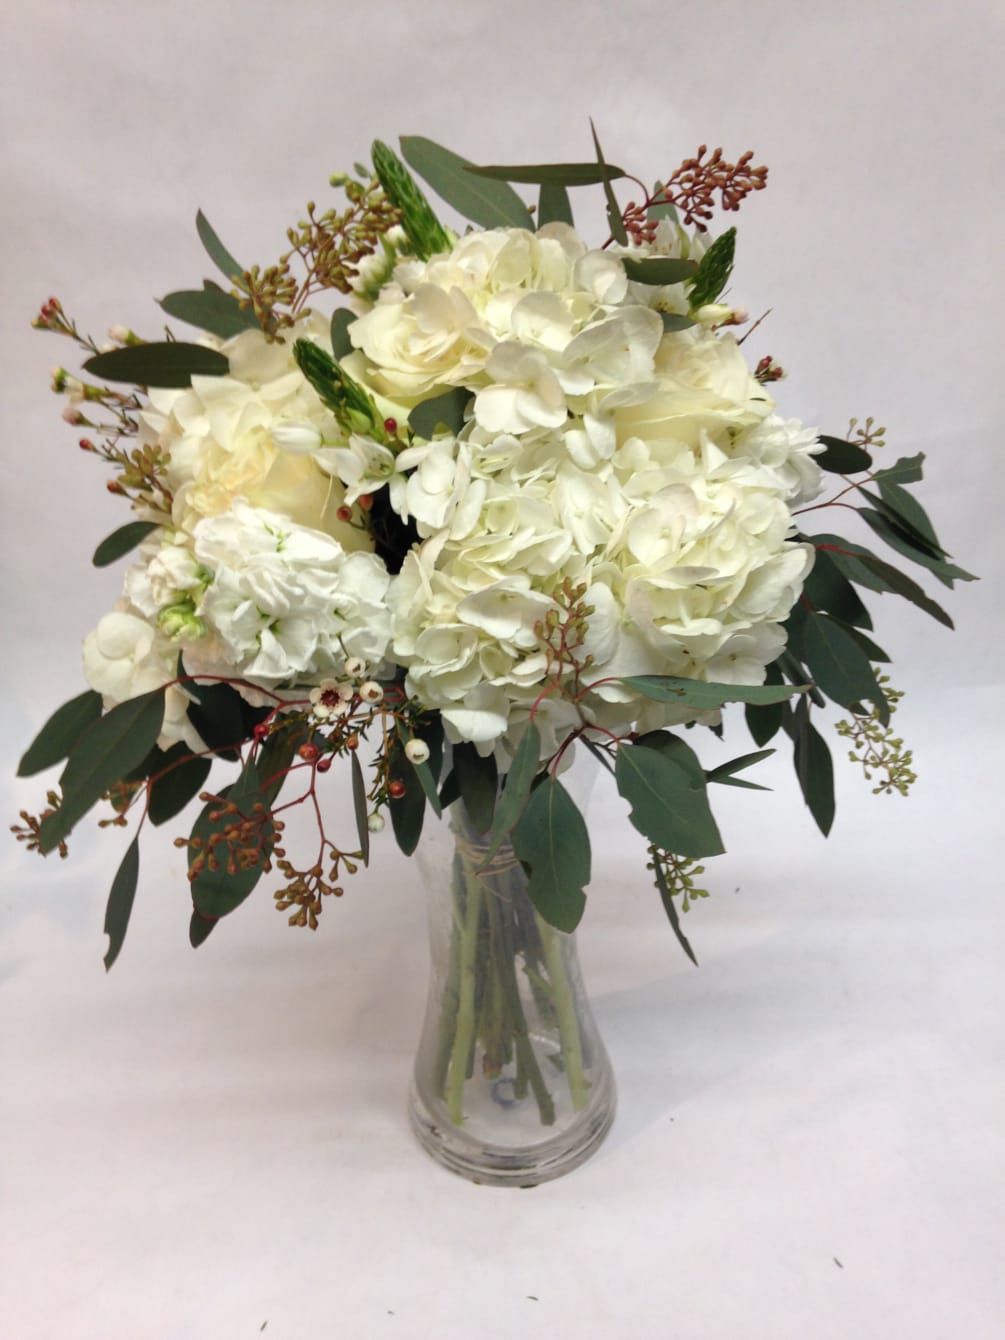 This textured hydrangea bouquet comes complete with stock, seeded eucalyptus and wax